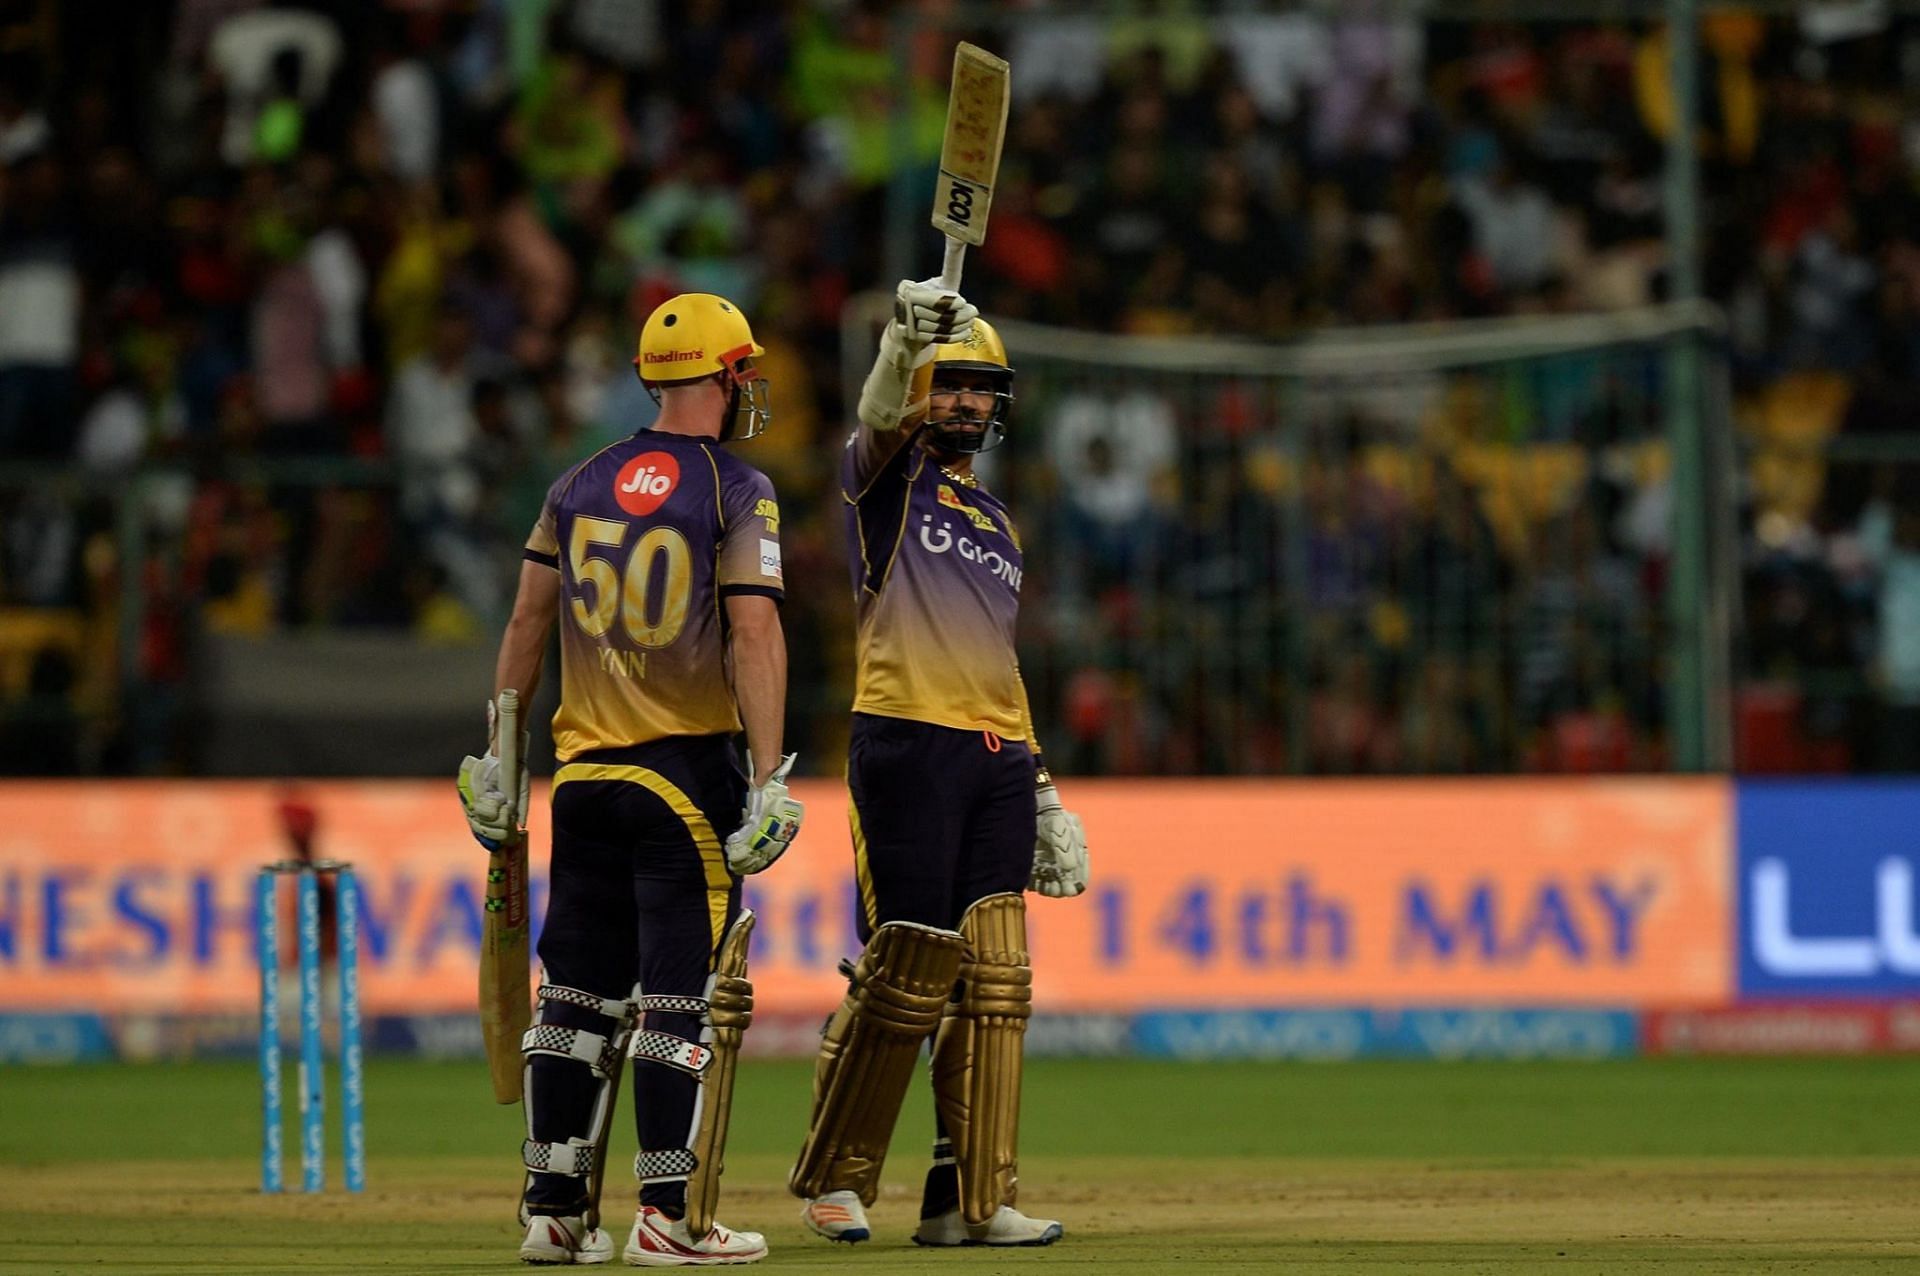 Sunil Narine-Chris Lynn have been the most explosive openers for KKR (Credits: BCCI/IPL)